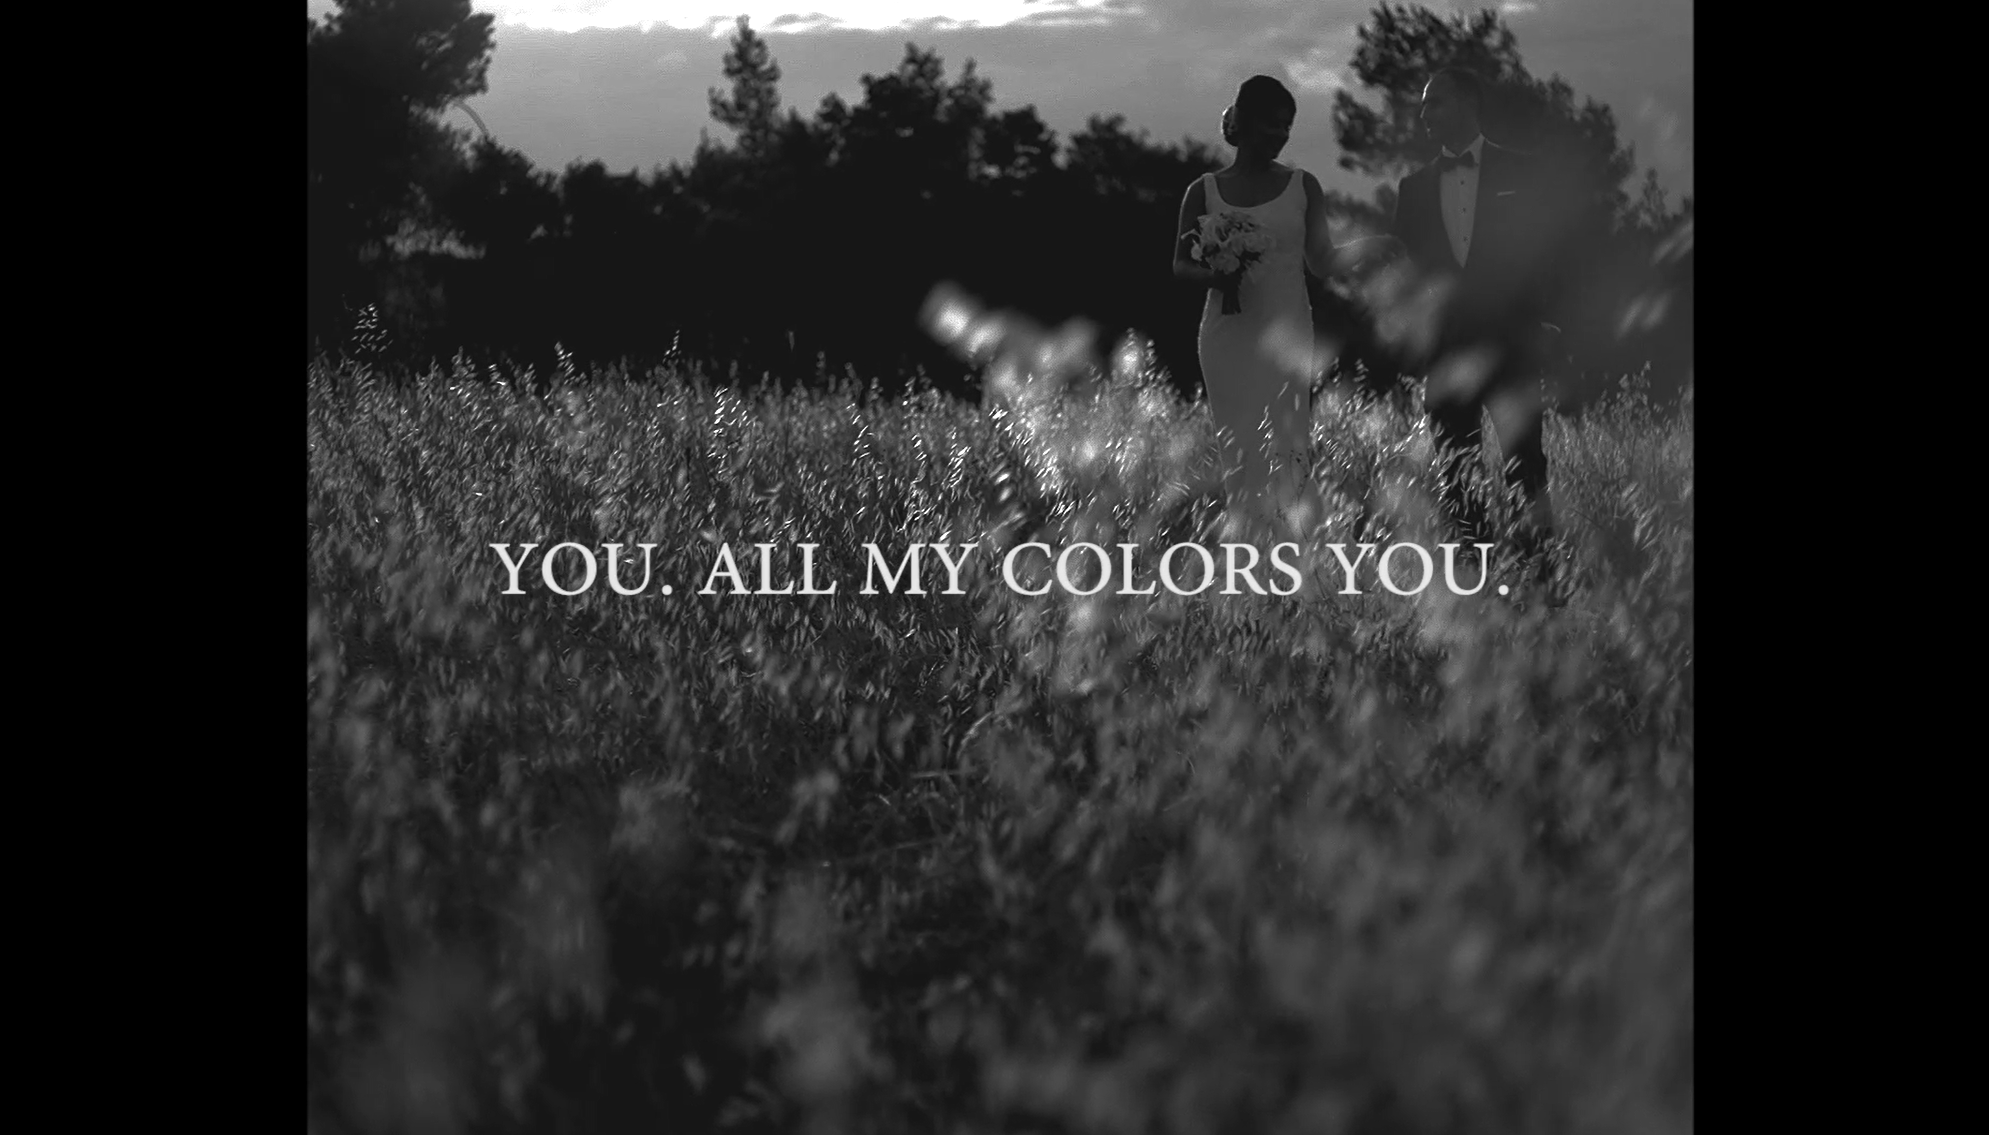 You. All my colors you.